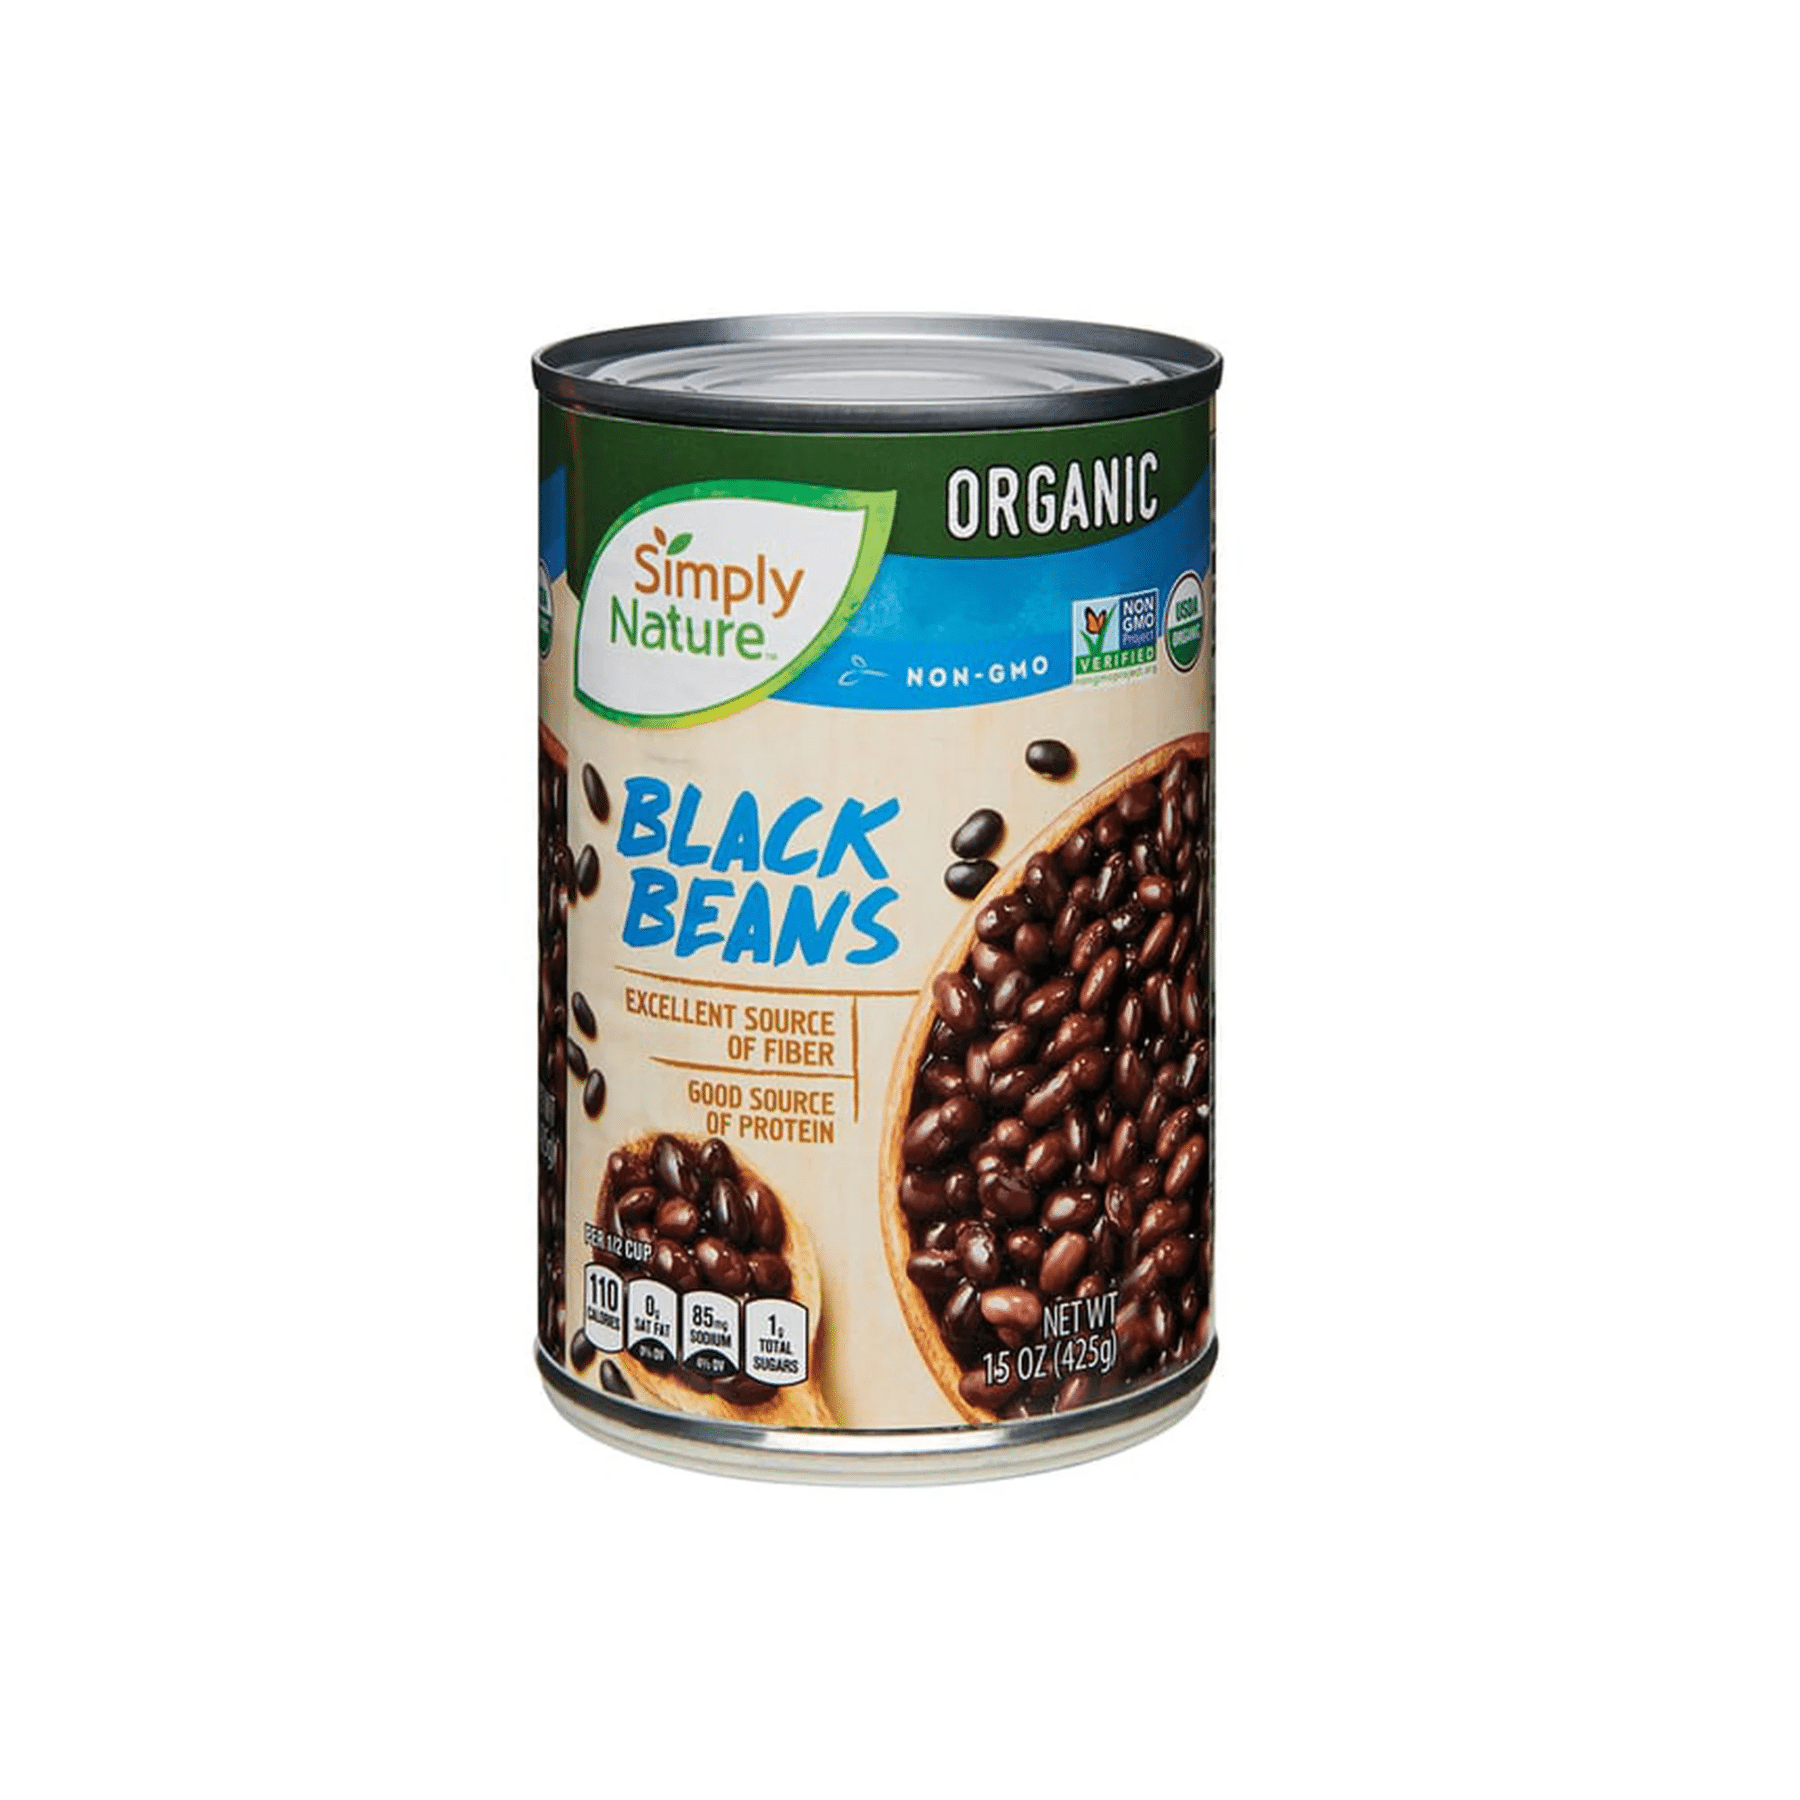 black beans rinsed and drained is an ingredient for the low carb burrito bowl